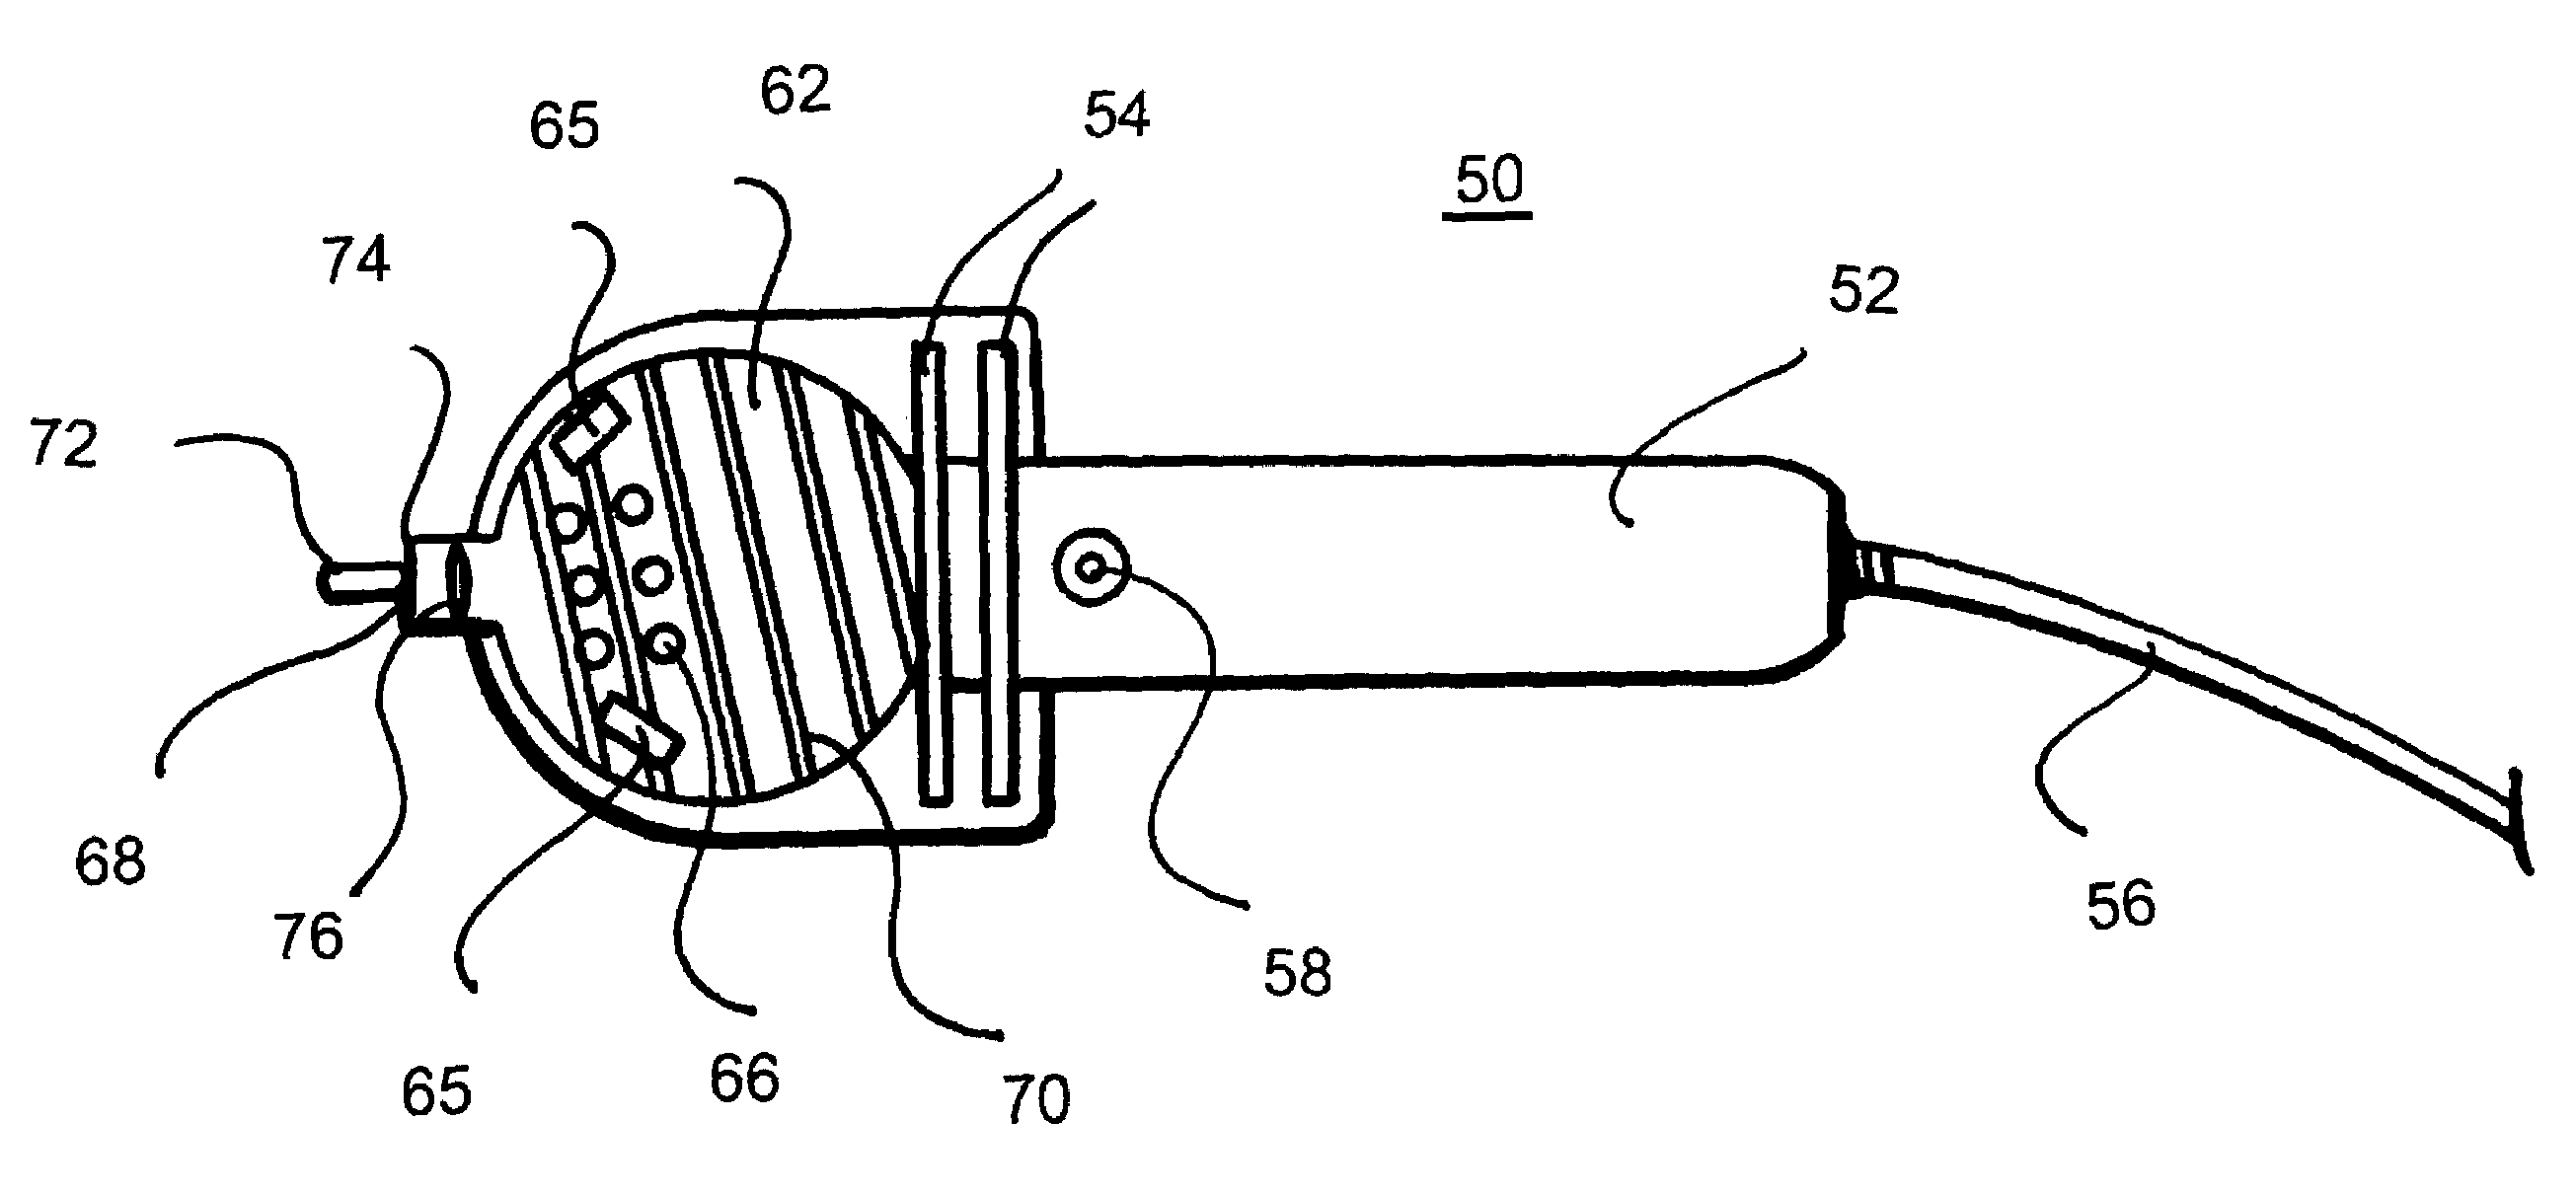 Light/electric probe system and method